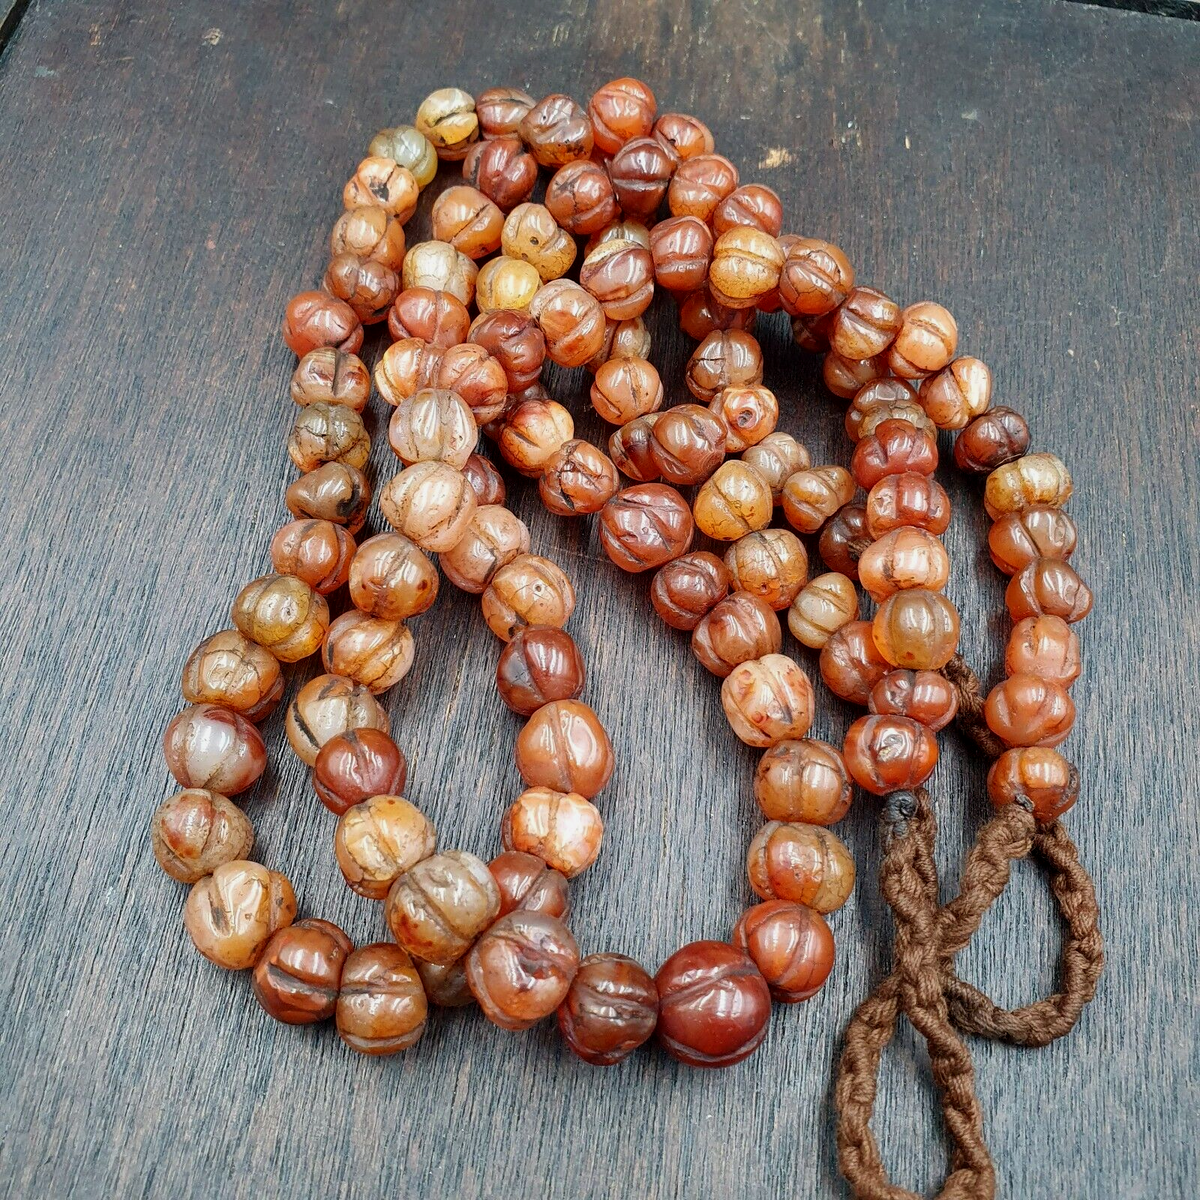 "Vintage Himalayan Tibetan Carnelian Carved Agate Melon Shape Beads Necklace. A stunning necklace featuring intricately carved agate beads in a melon shape, with a beautiful carnelian stone accent. The beads showcase traditional Tibetan craftsmanship, with a warm, earthy tone that evokes the Himalayan region's rich cultural heritage."